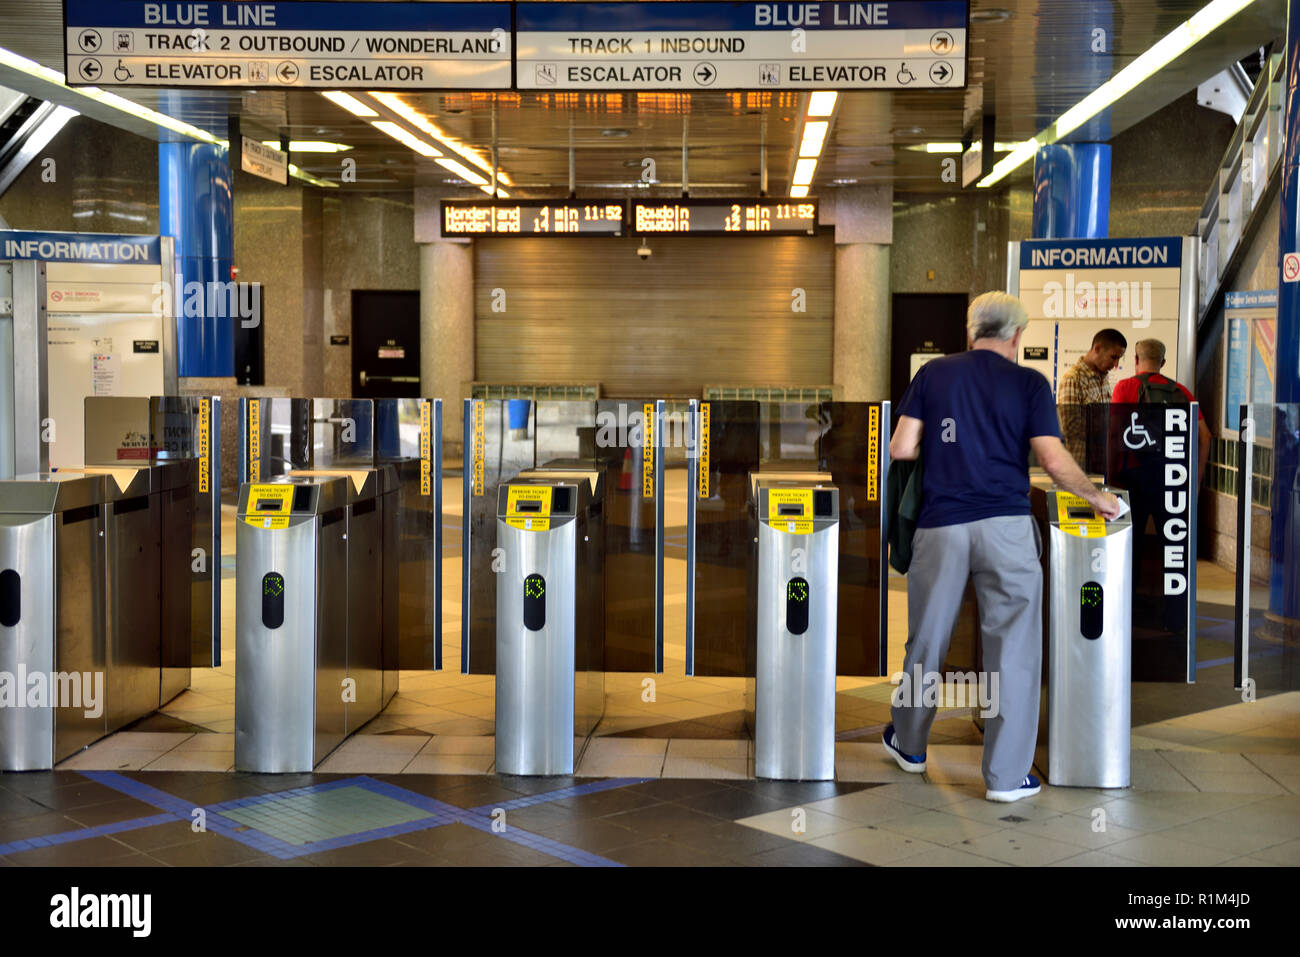 Service Victoria app after scanning the check-in code sticker onboard  V/Line carriage BZN267 - Wongm's Rail Gallery